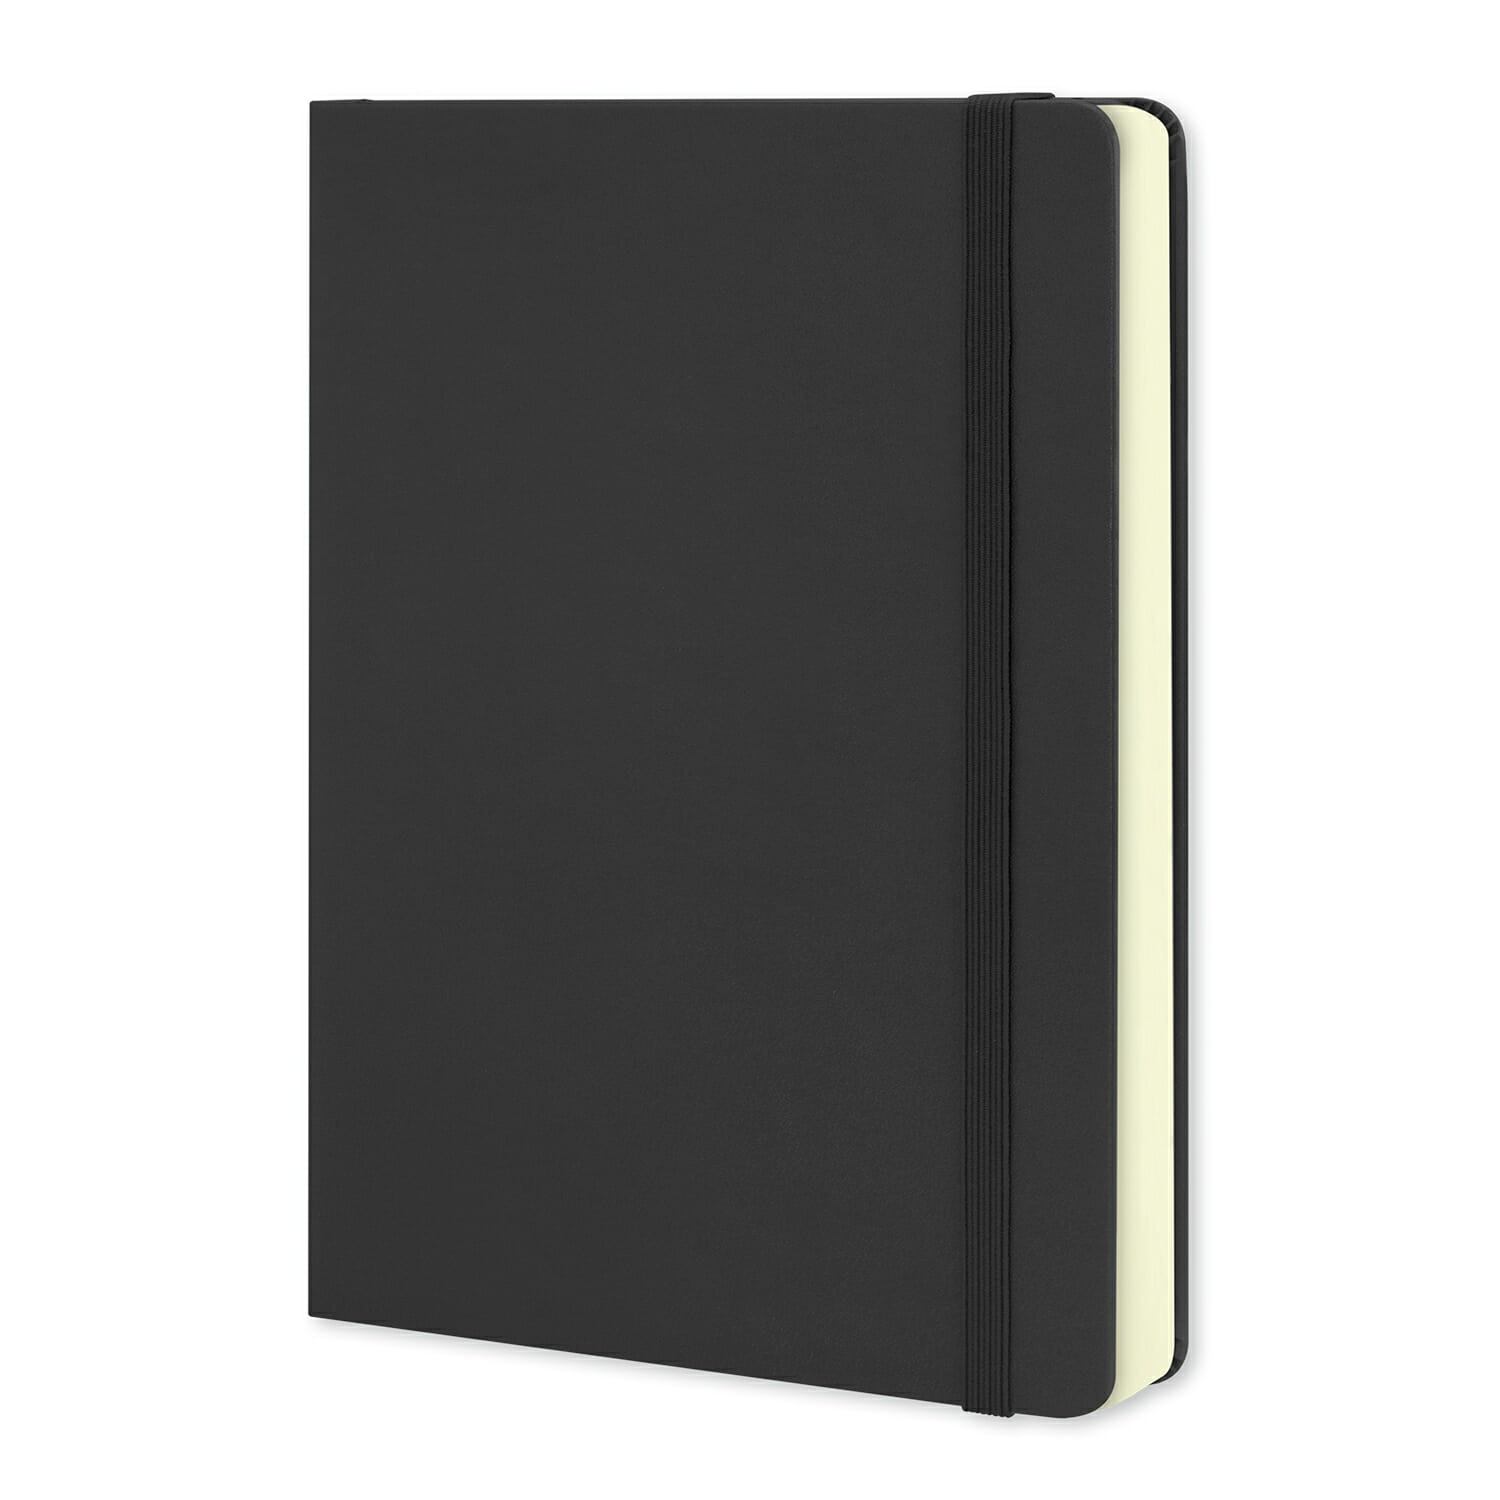 Moleskine 2024 Planner - Daily - Express Promo